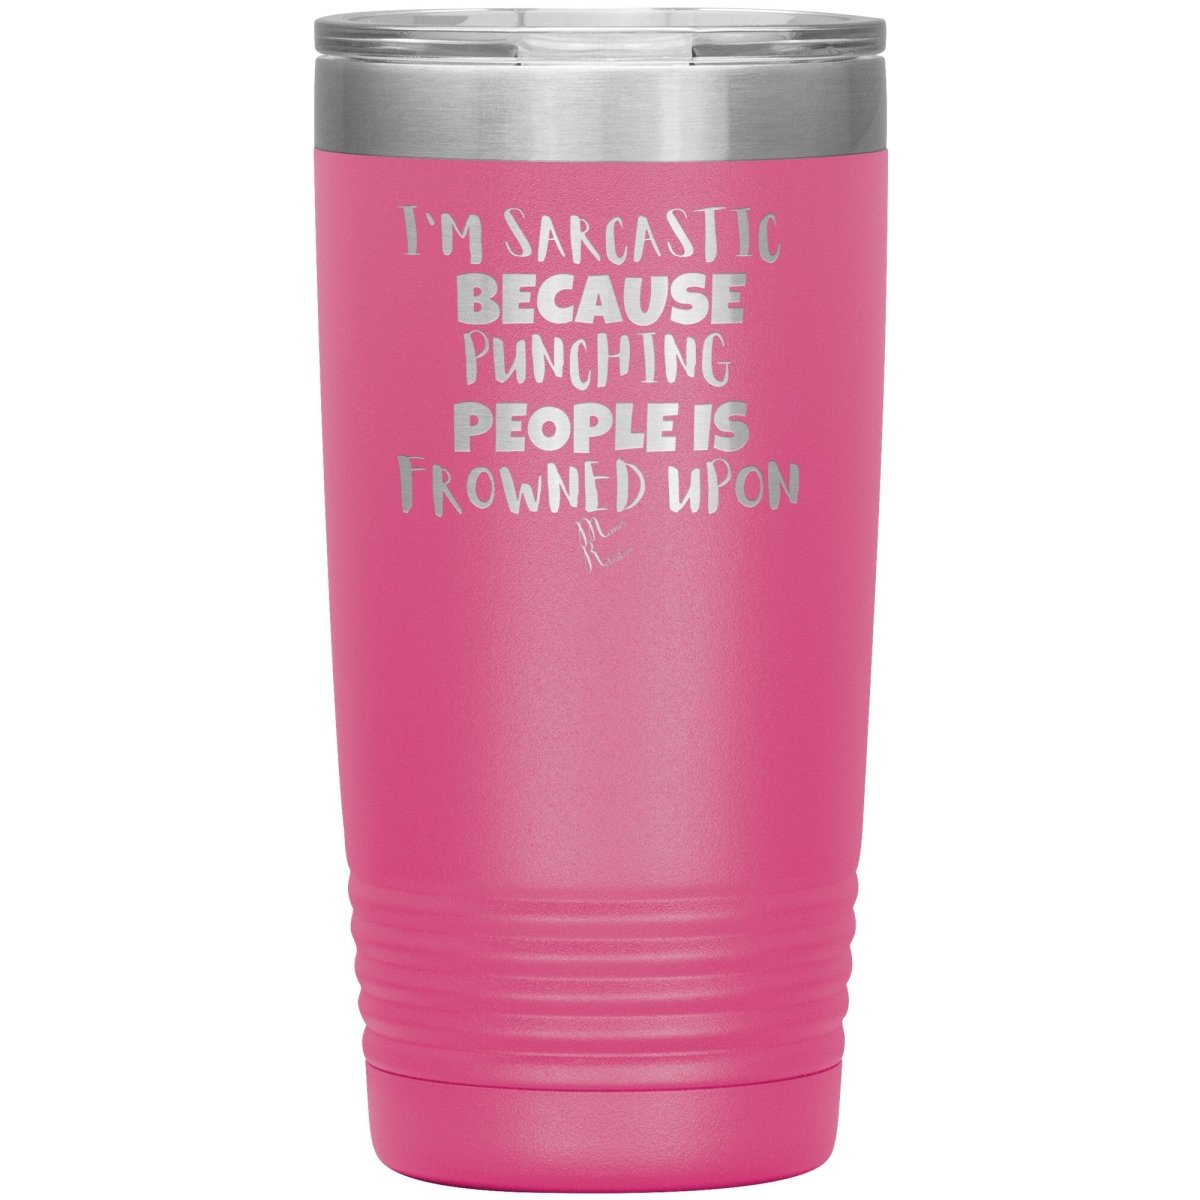 I'm Sarcastic Because Punching People is Frowned Upon Tumblers, 20oz Insulated Tumbler / Pink - MemesRetail.com